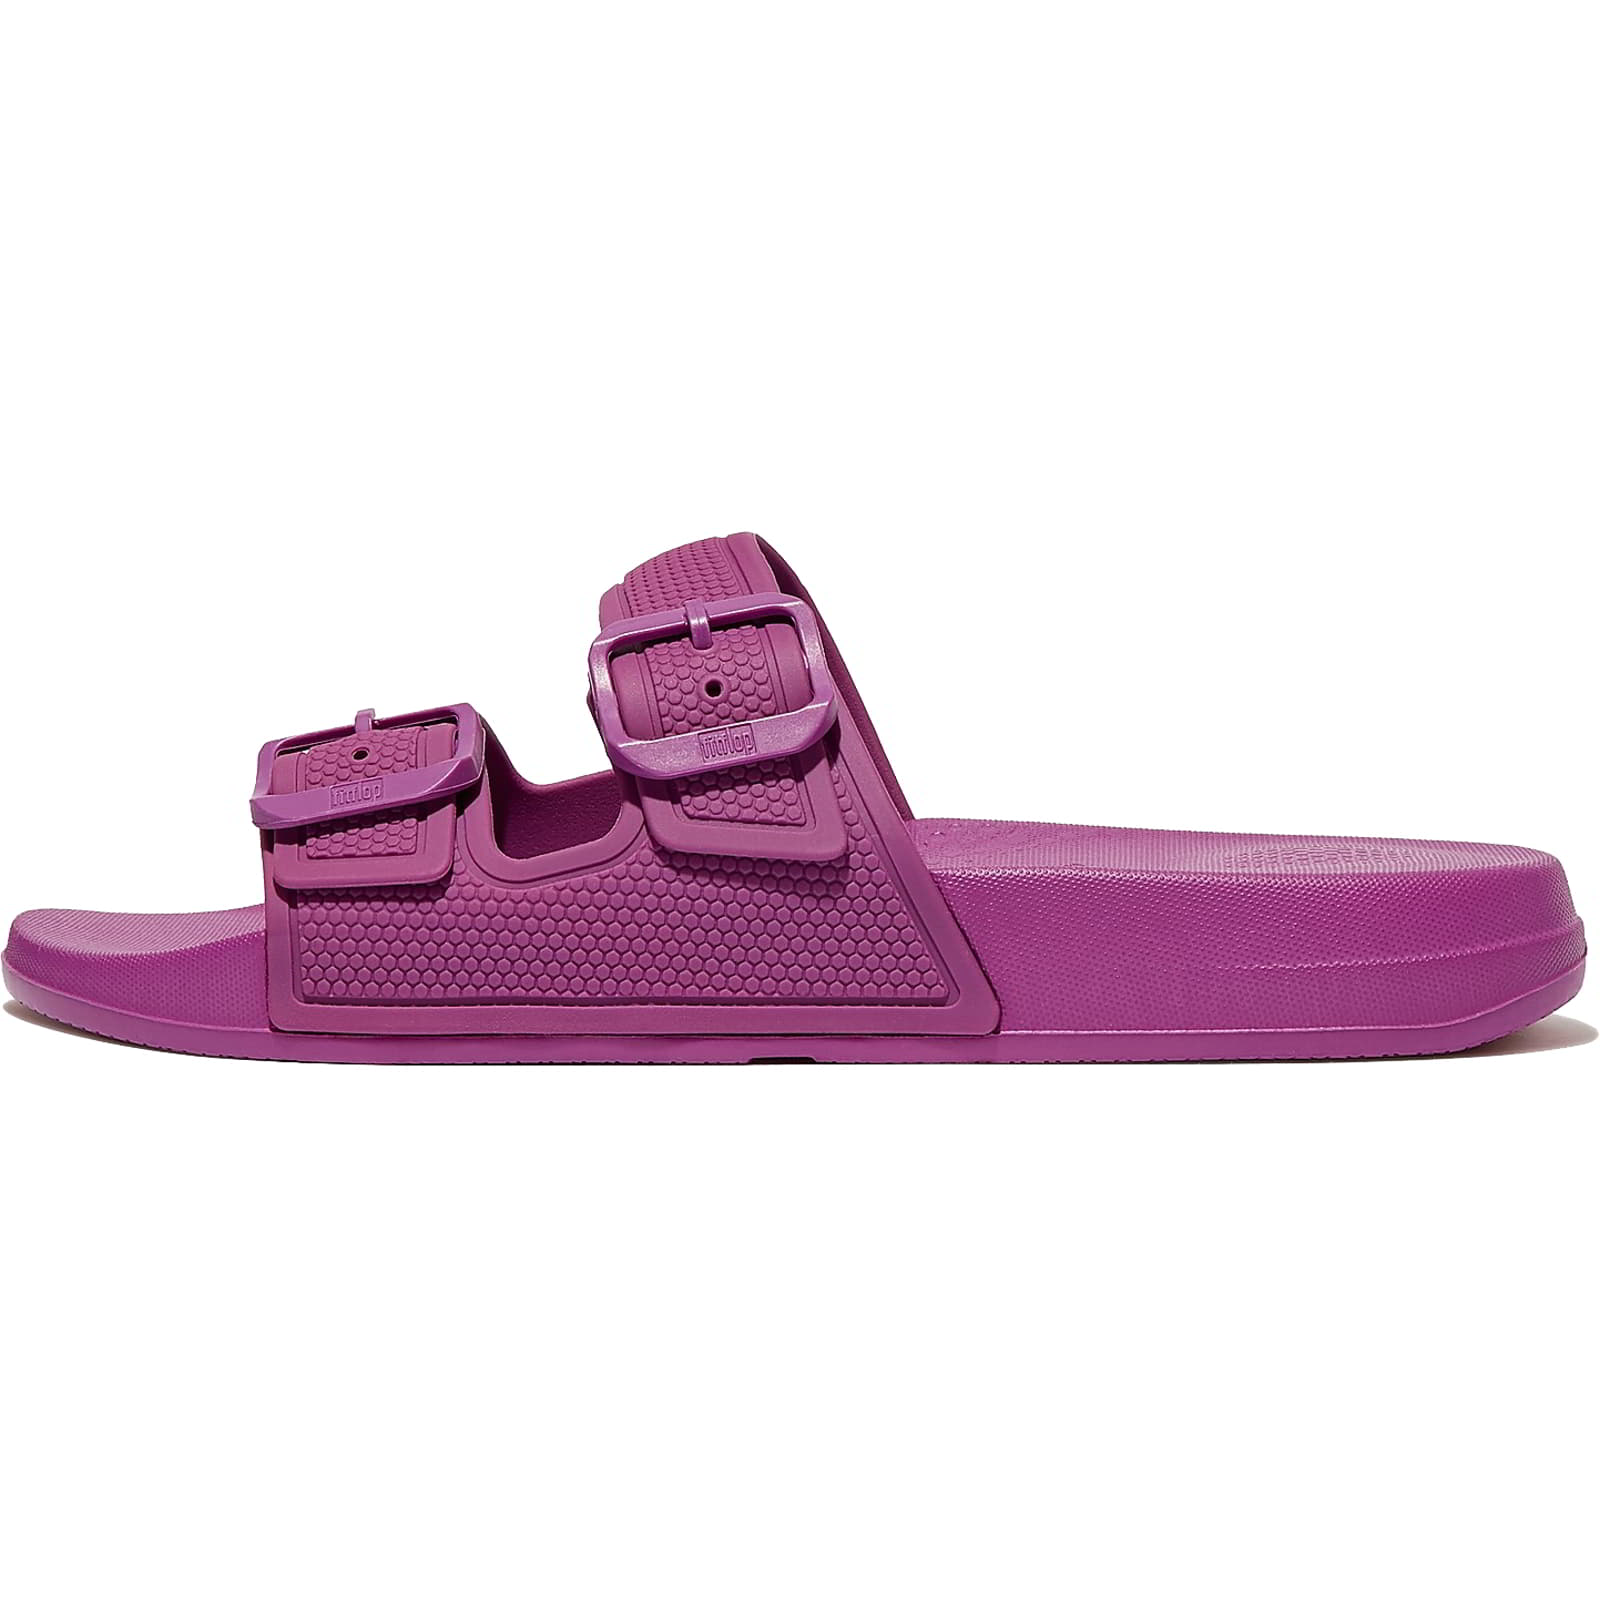 FitFlop Women's Iqushion Pool Slides Sandals - UK 5